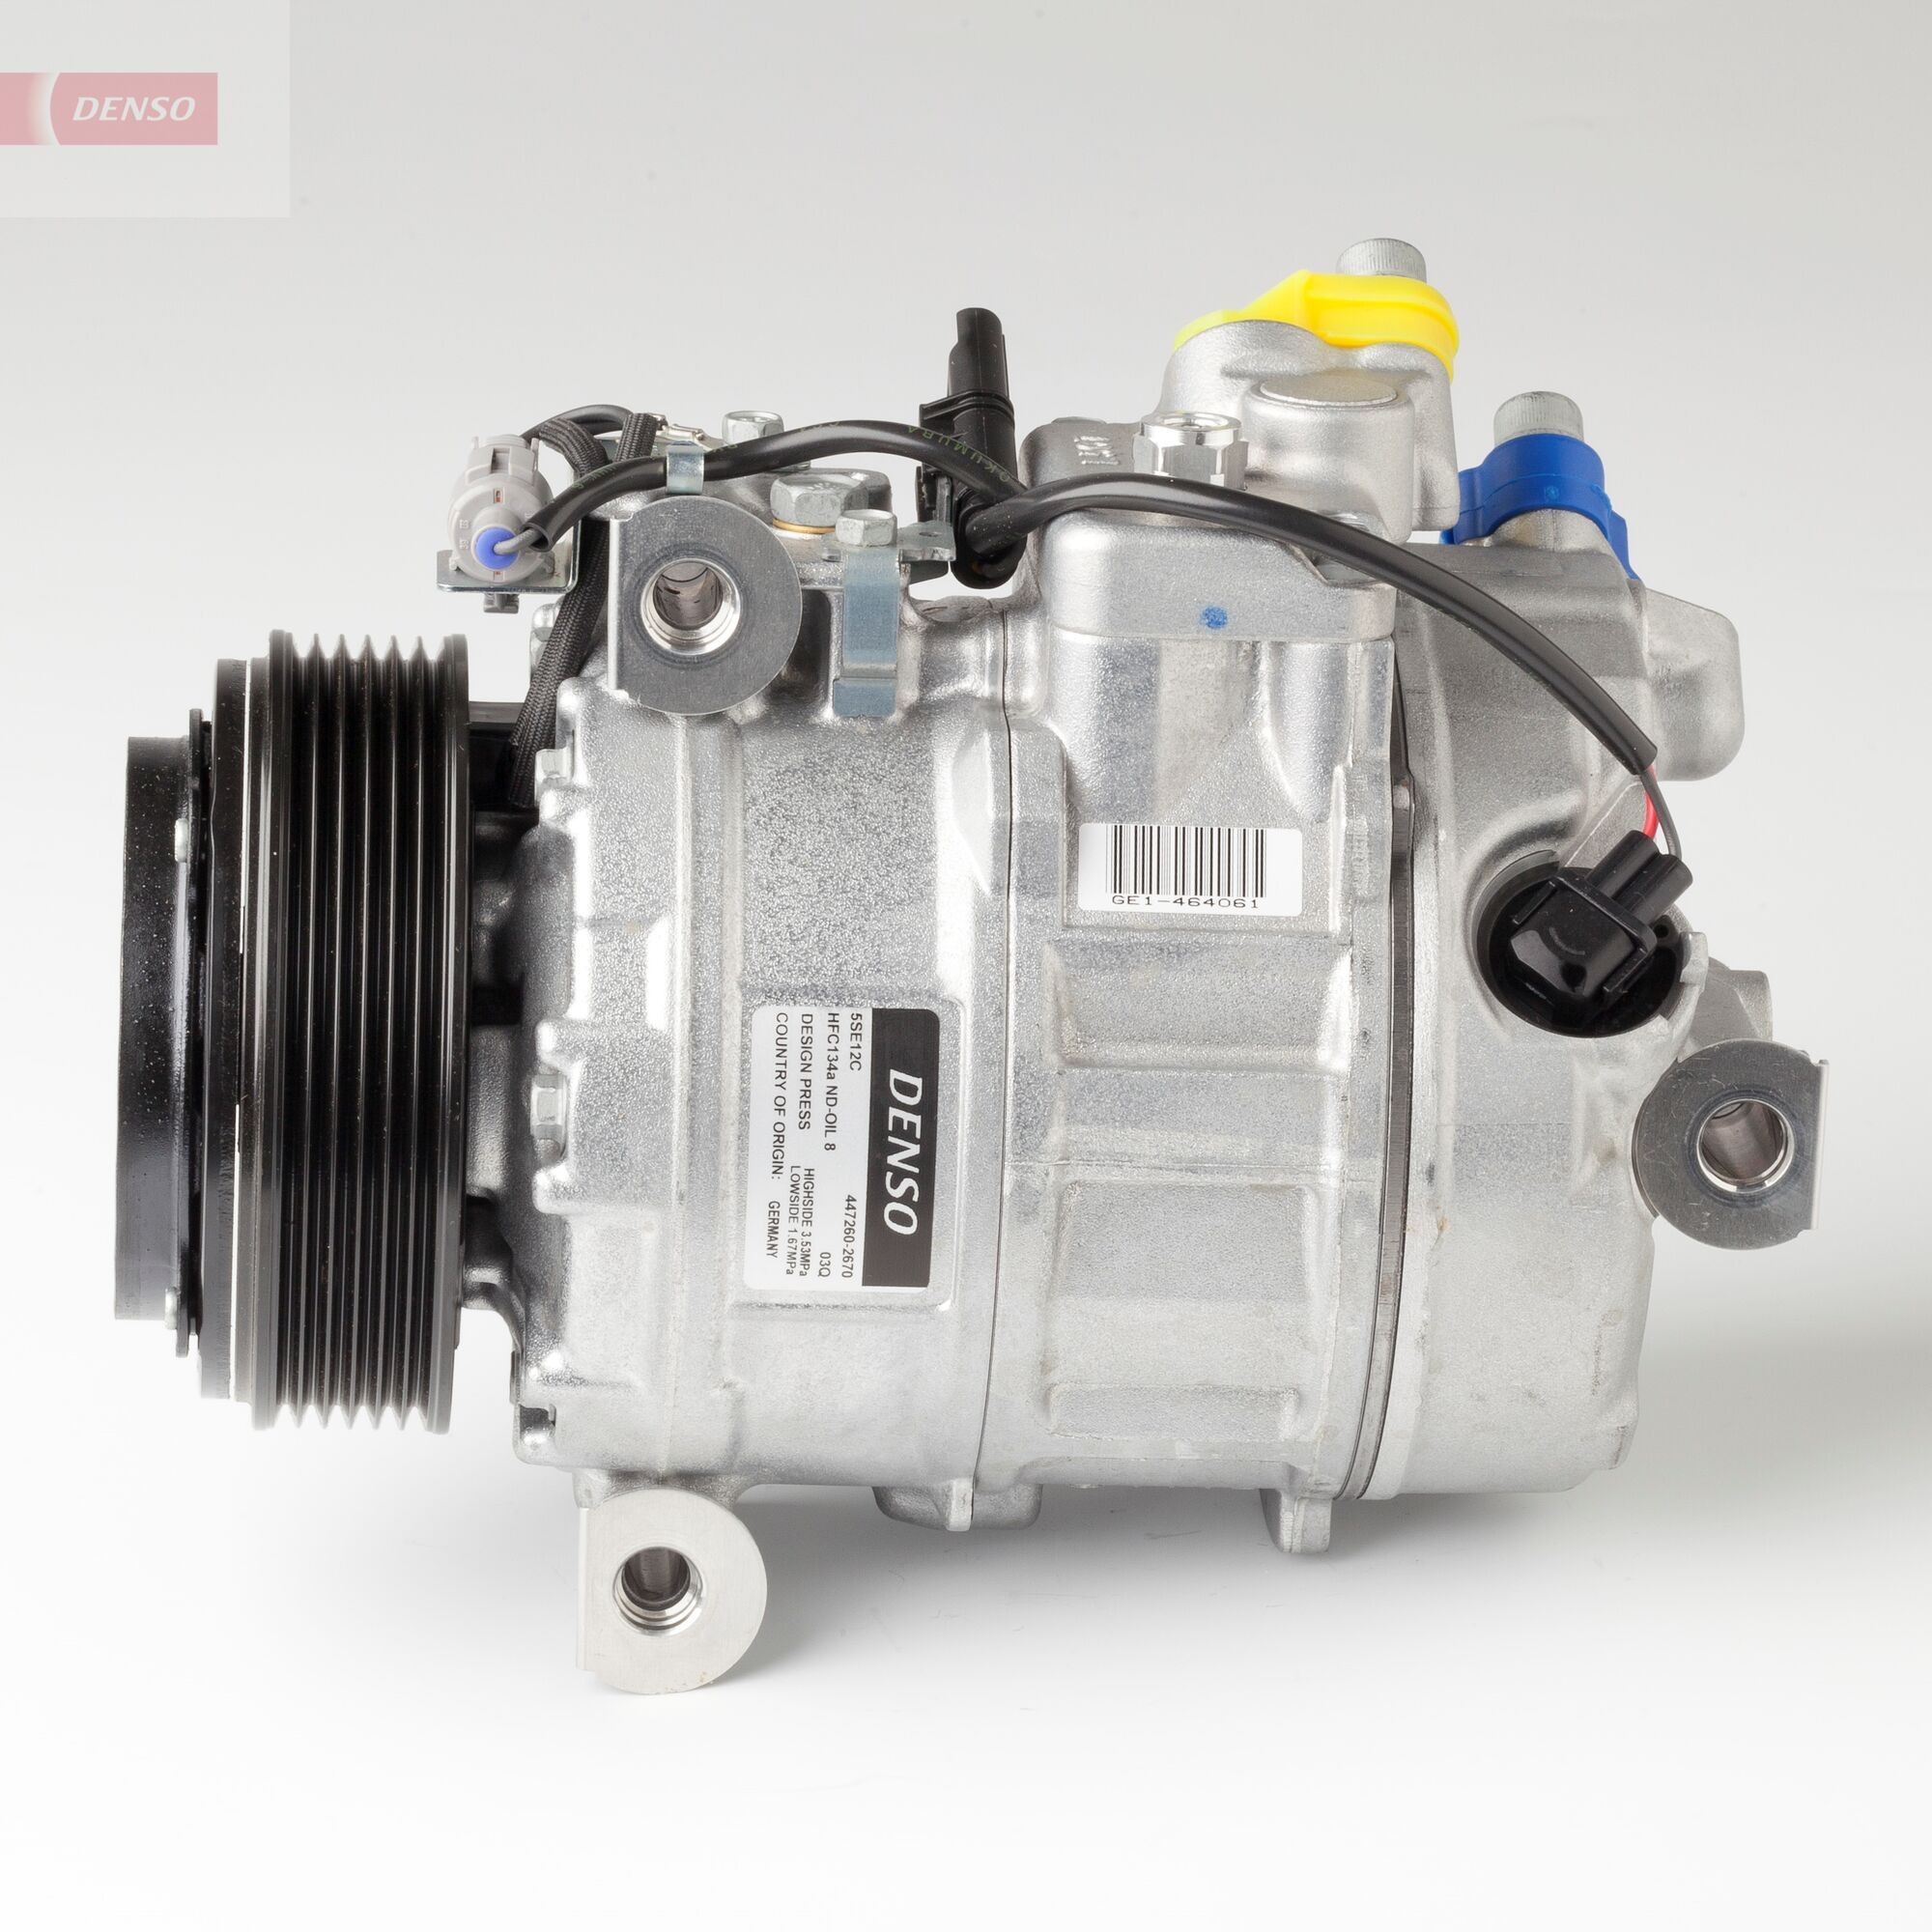 DENSO Air conditioning compressor DCP05093 BMW 5 Series 2010